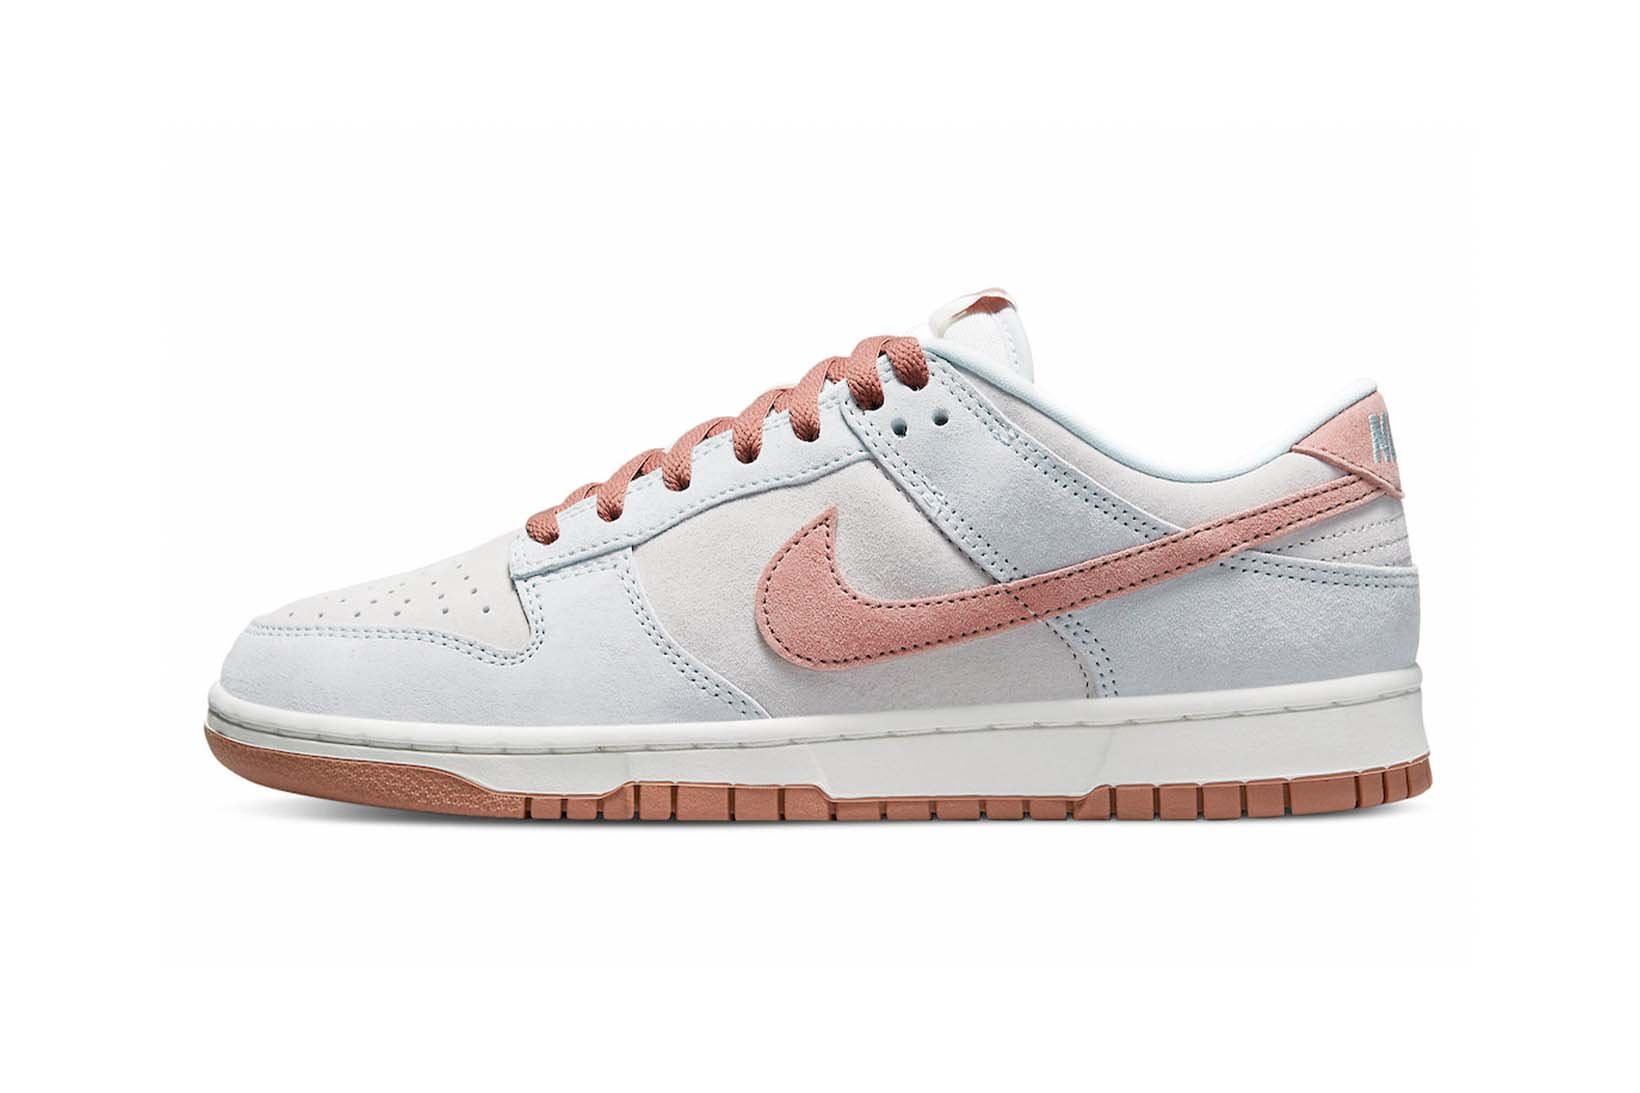 nike-dunk-low-fossil-rose-price-release-date-1.jpg